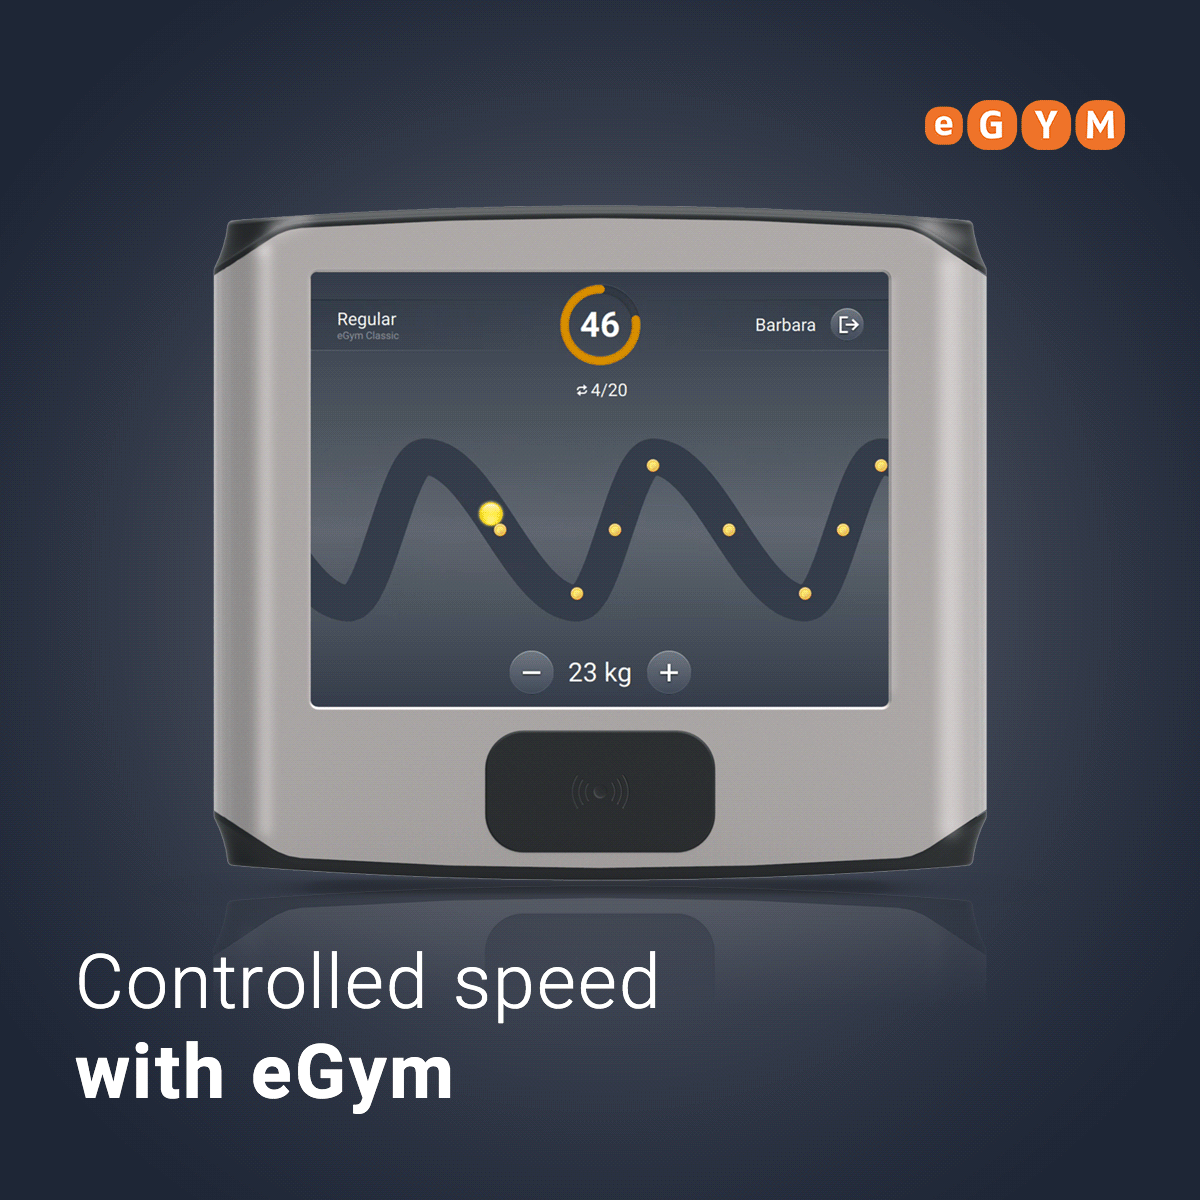 eGym controlling speed